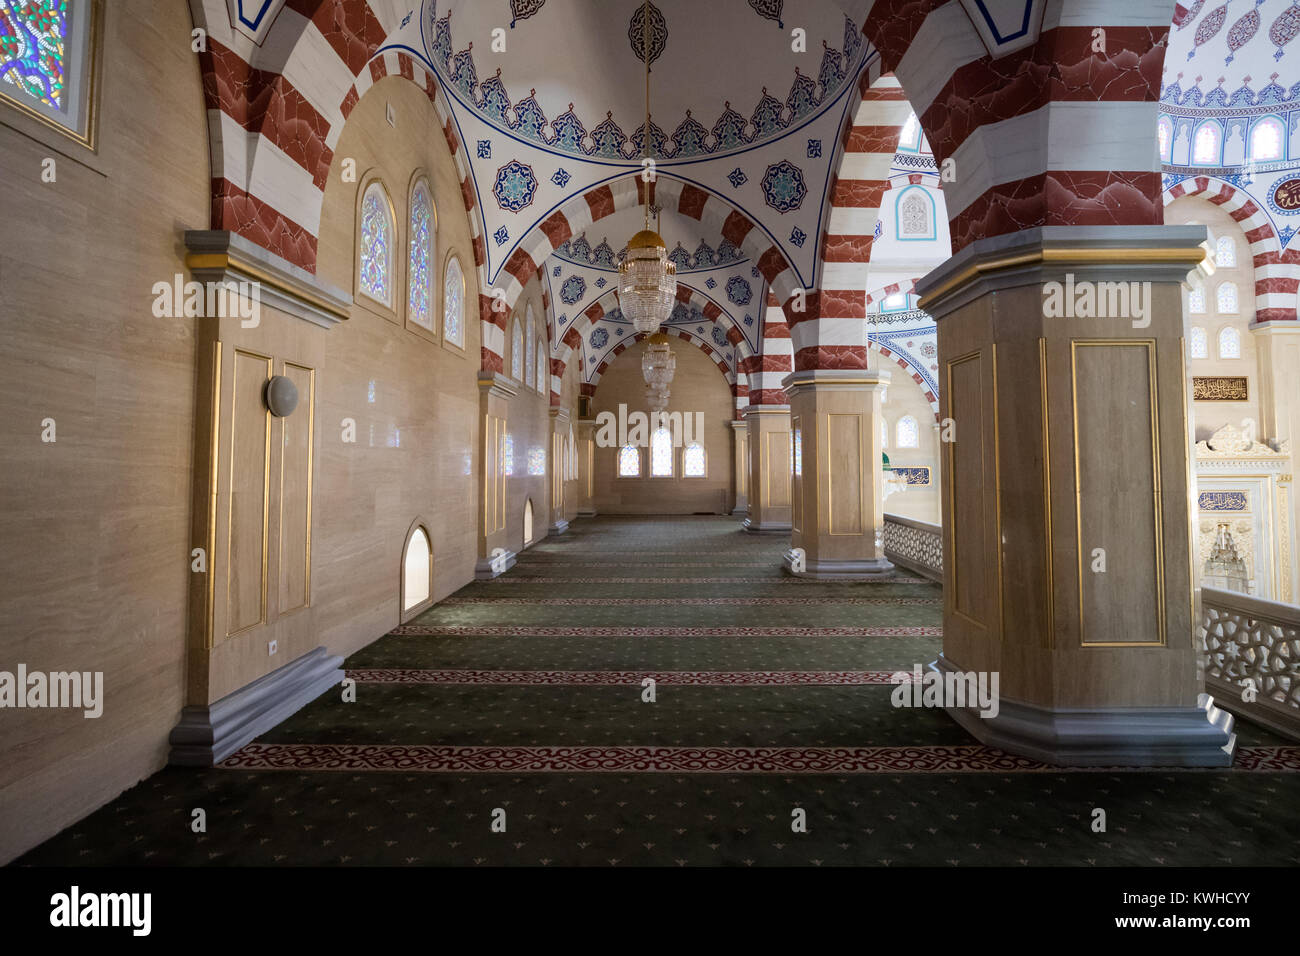 Interiors of the Heart of Chechnya Mosque, Grozny Stock Photo